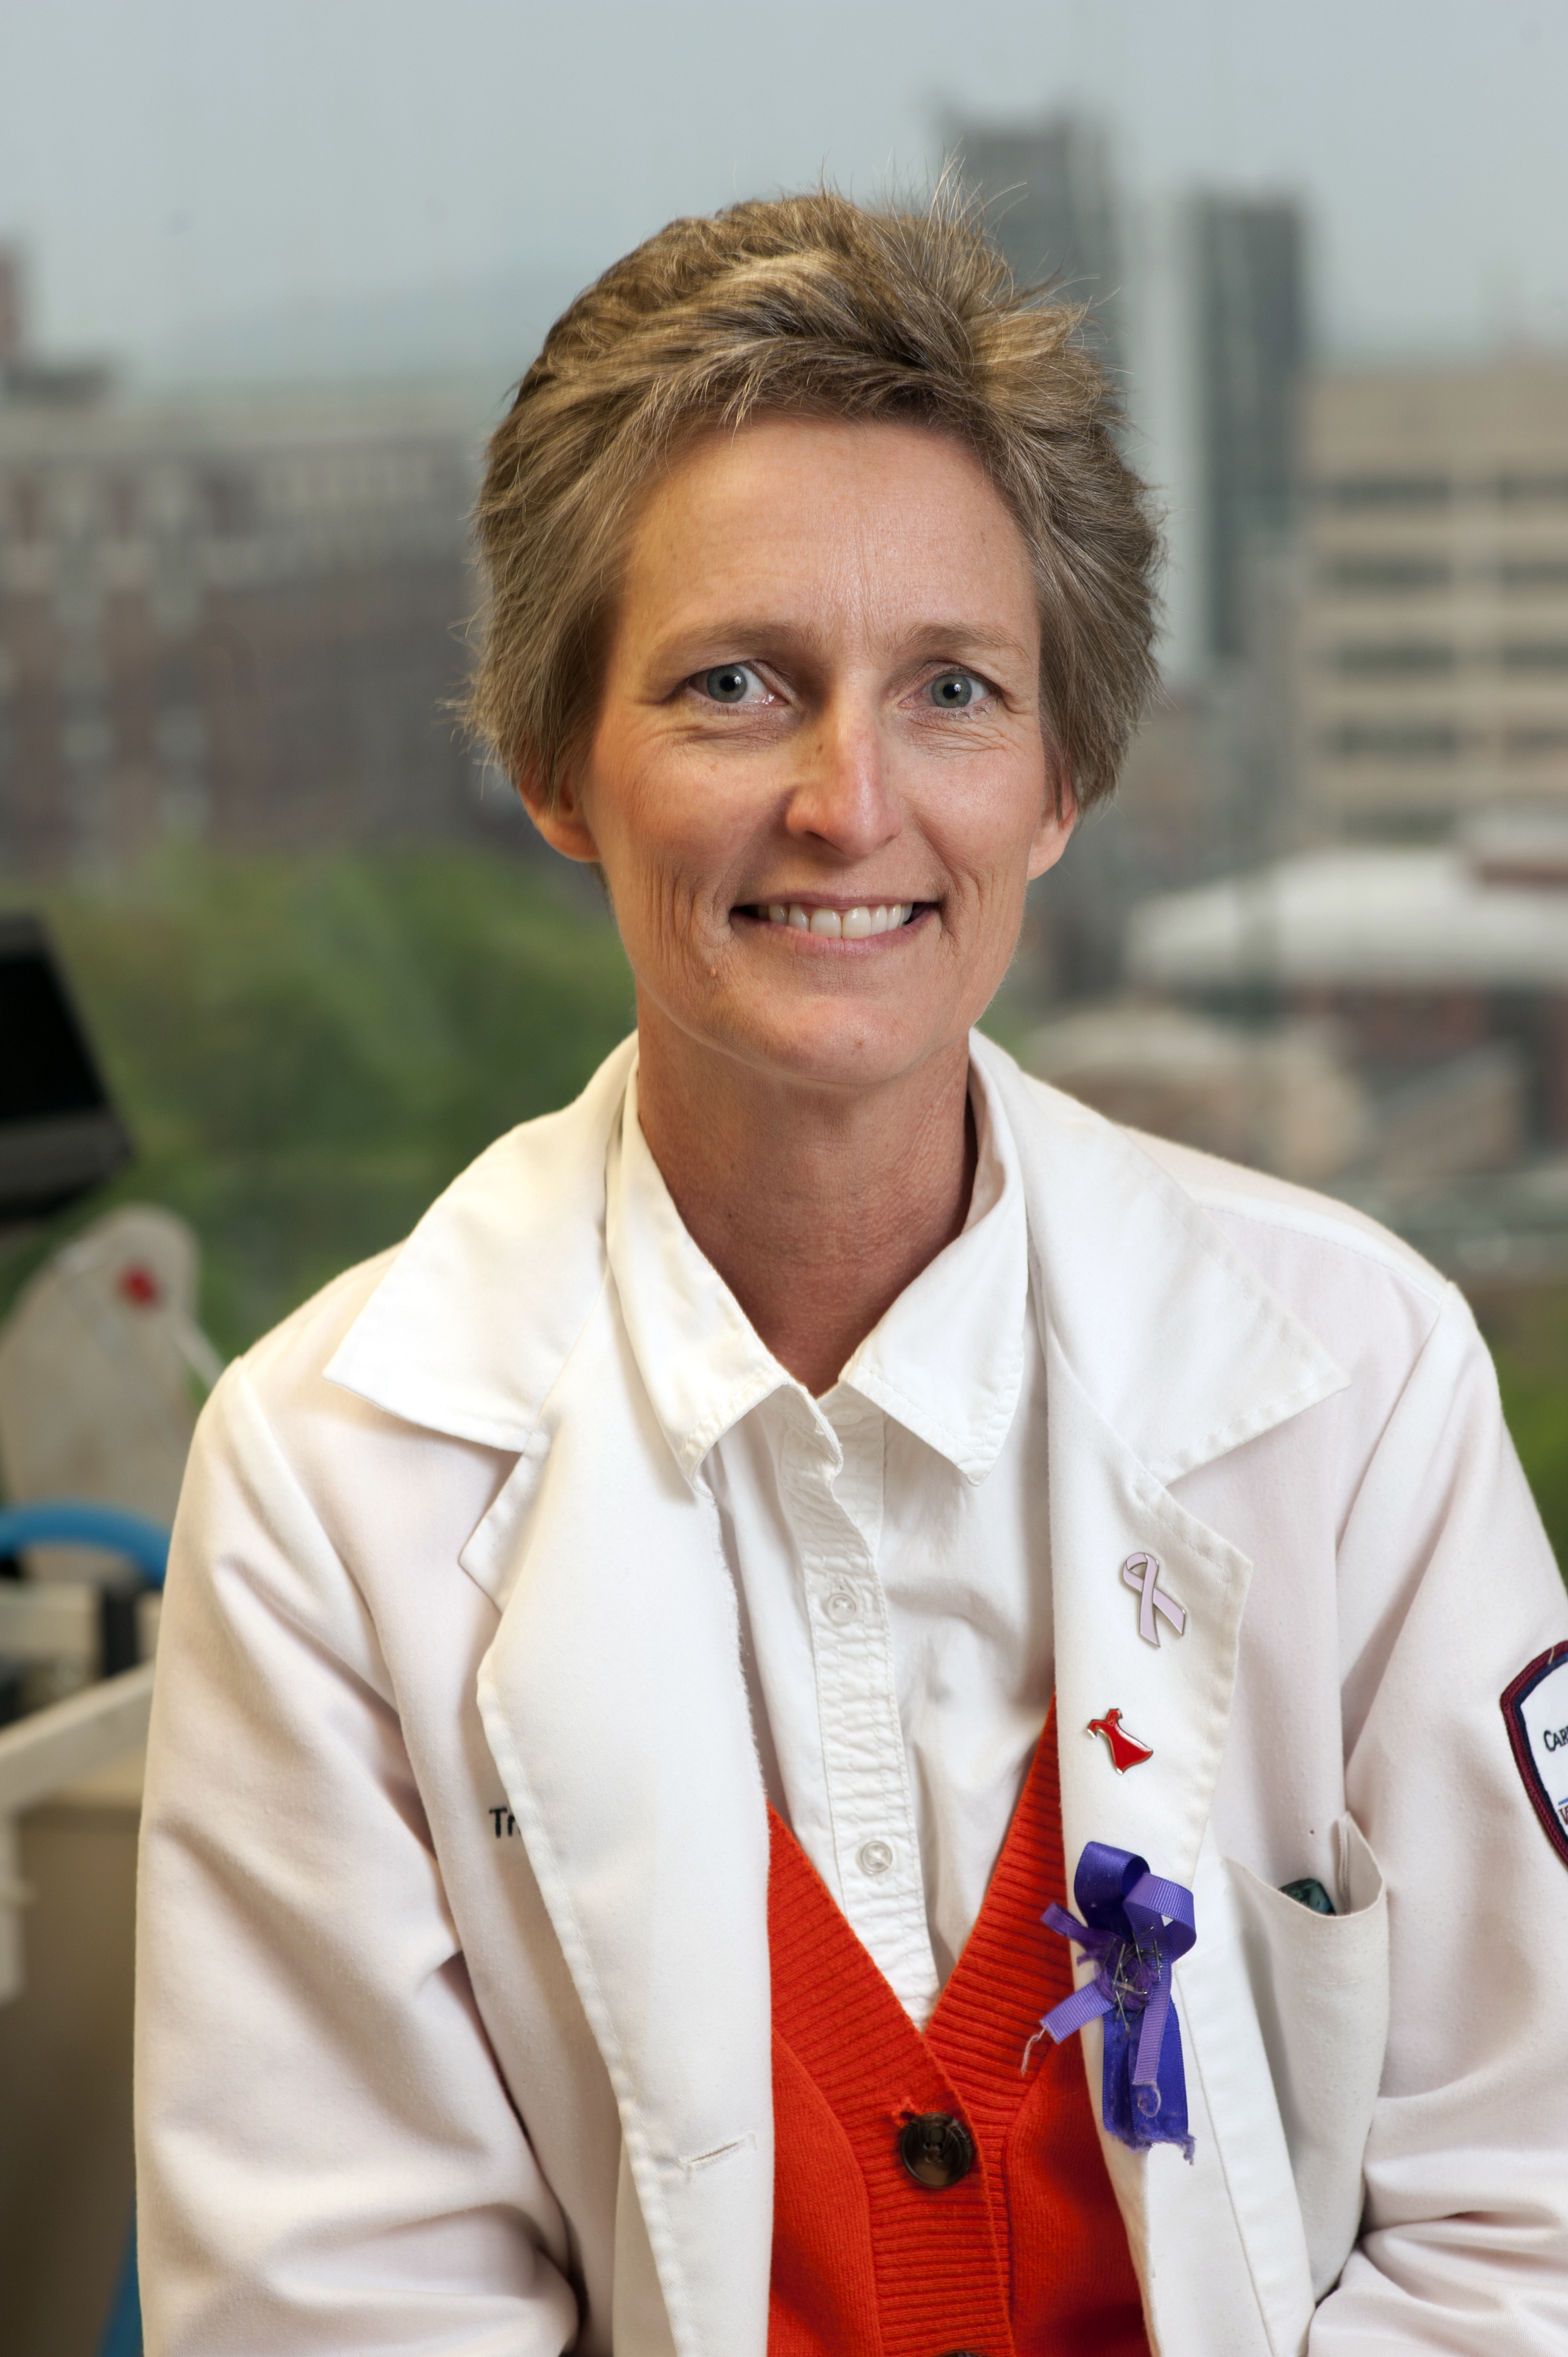 Dr. Tracey Criss